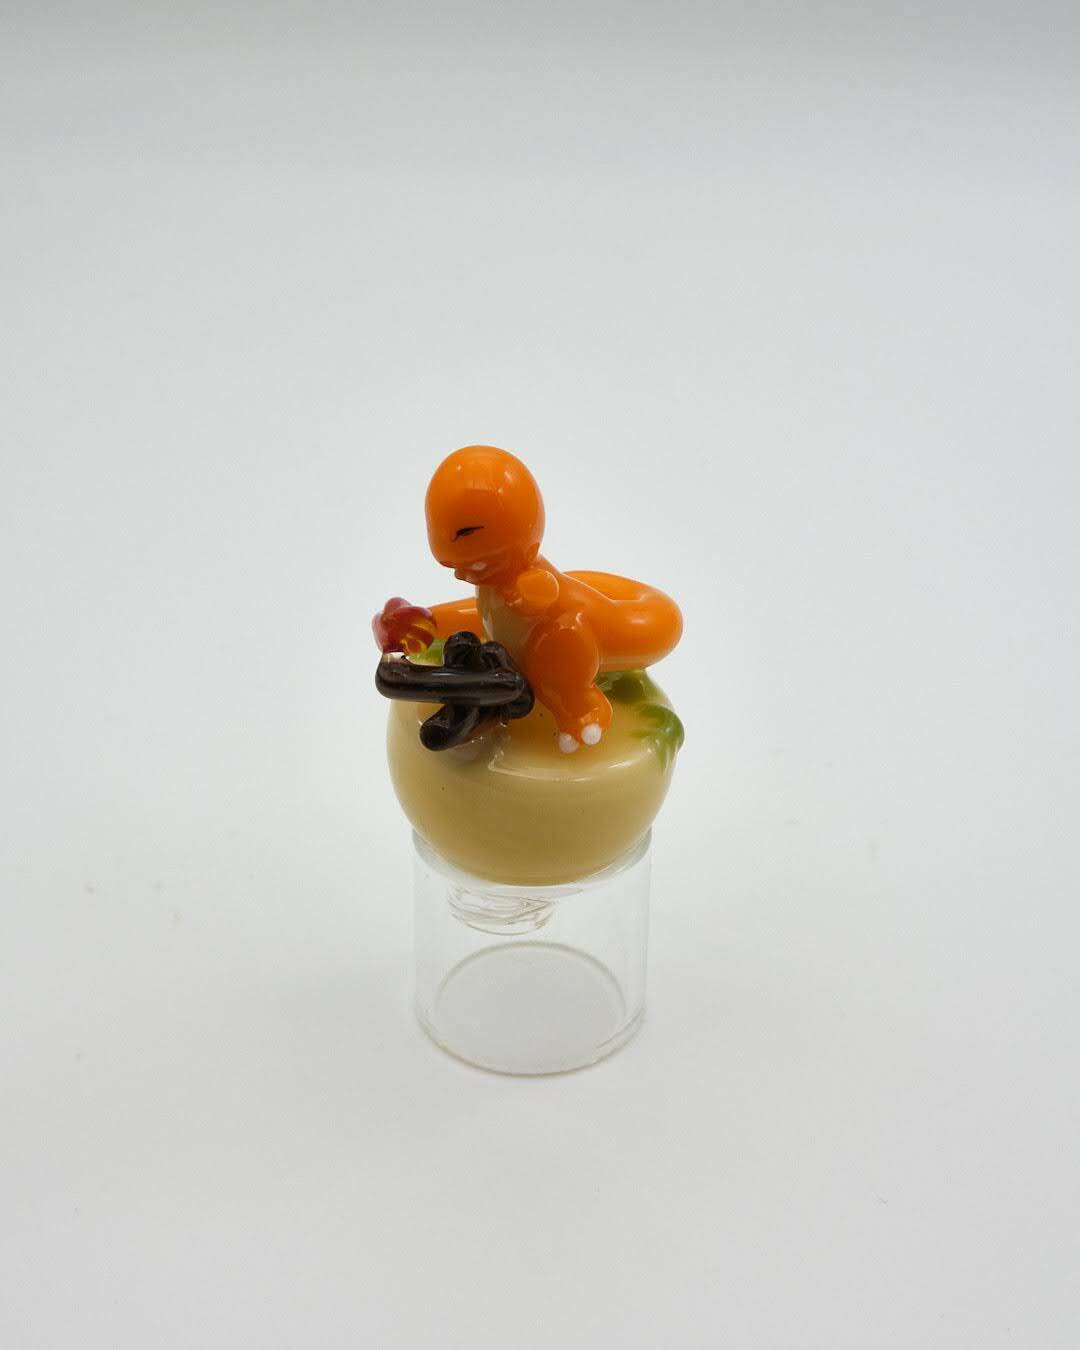 exclusive design of the Charmander Spinner Cap By Saiyan Glass